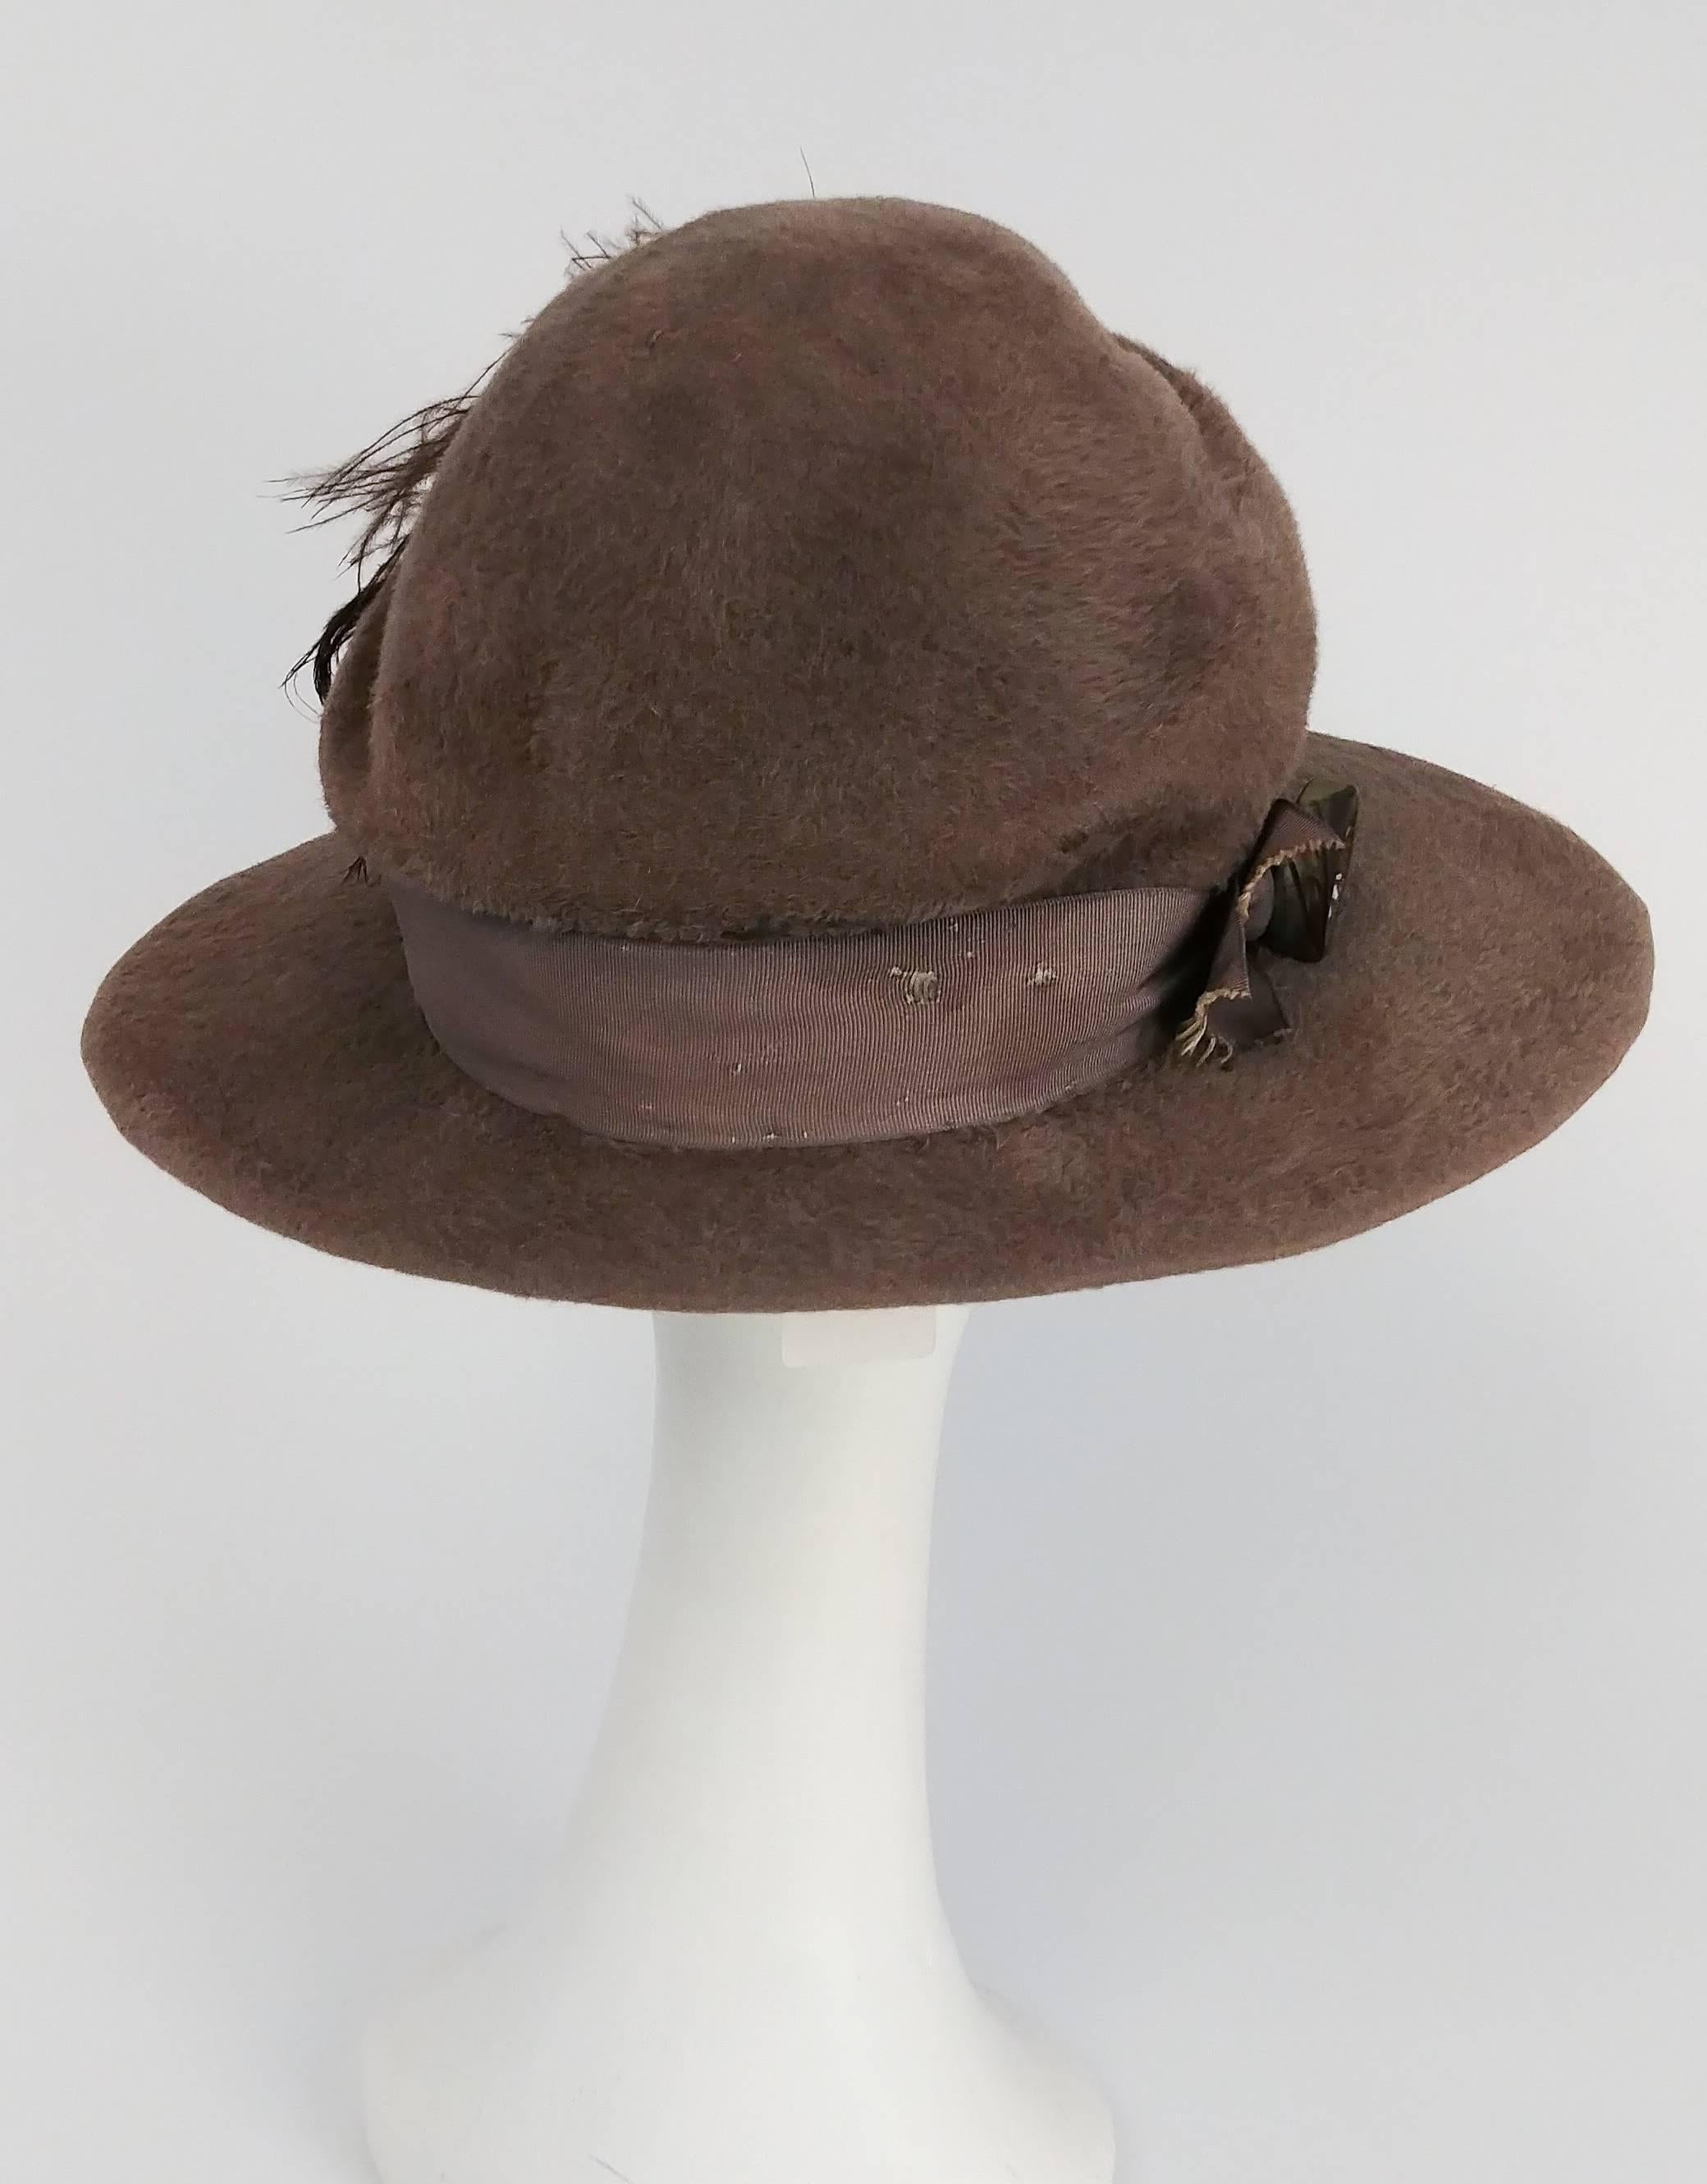 Edwardian Round Fur Felt Hat w/ Feather In Good Condition For Sale In San Francisco, CA